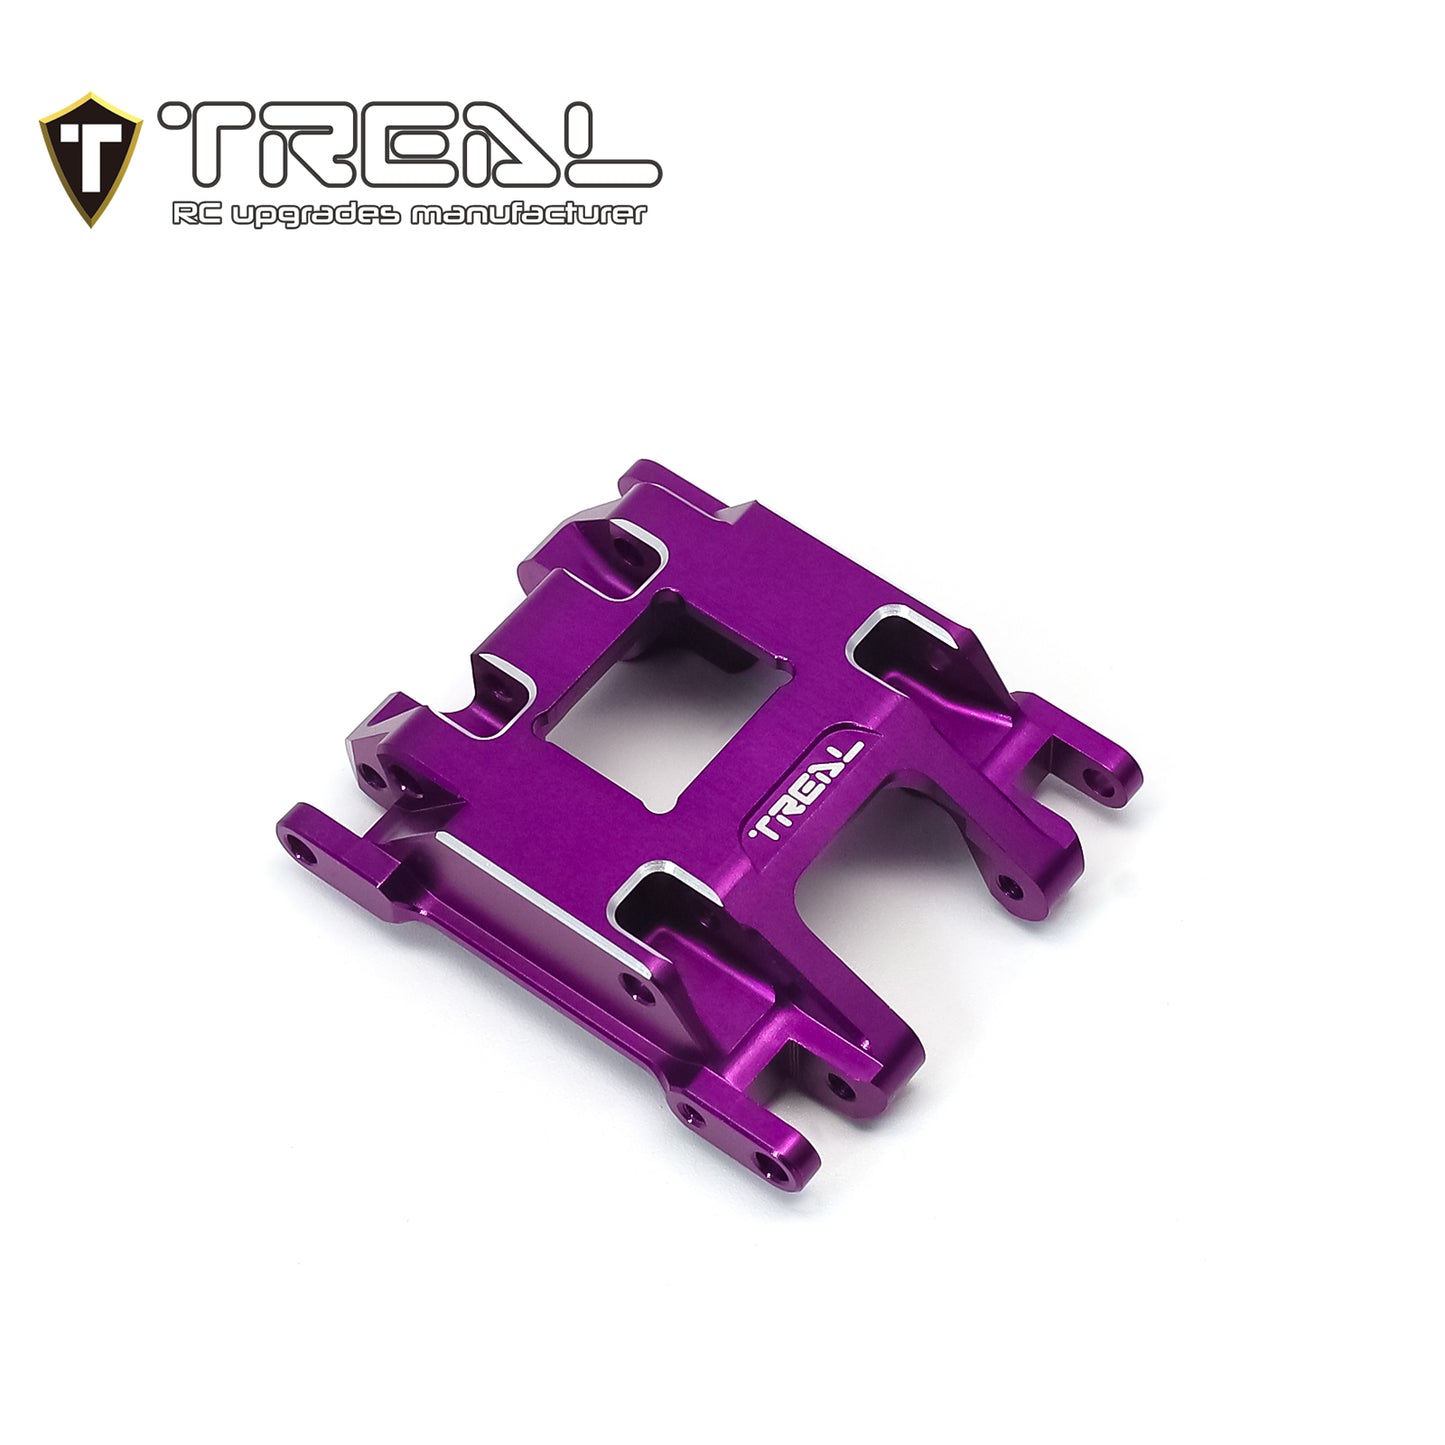 TREAL Aluminum 7075 Center Skid Plate CNC Machined Upgrdes for 1/18 TRX4M